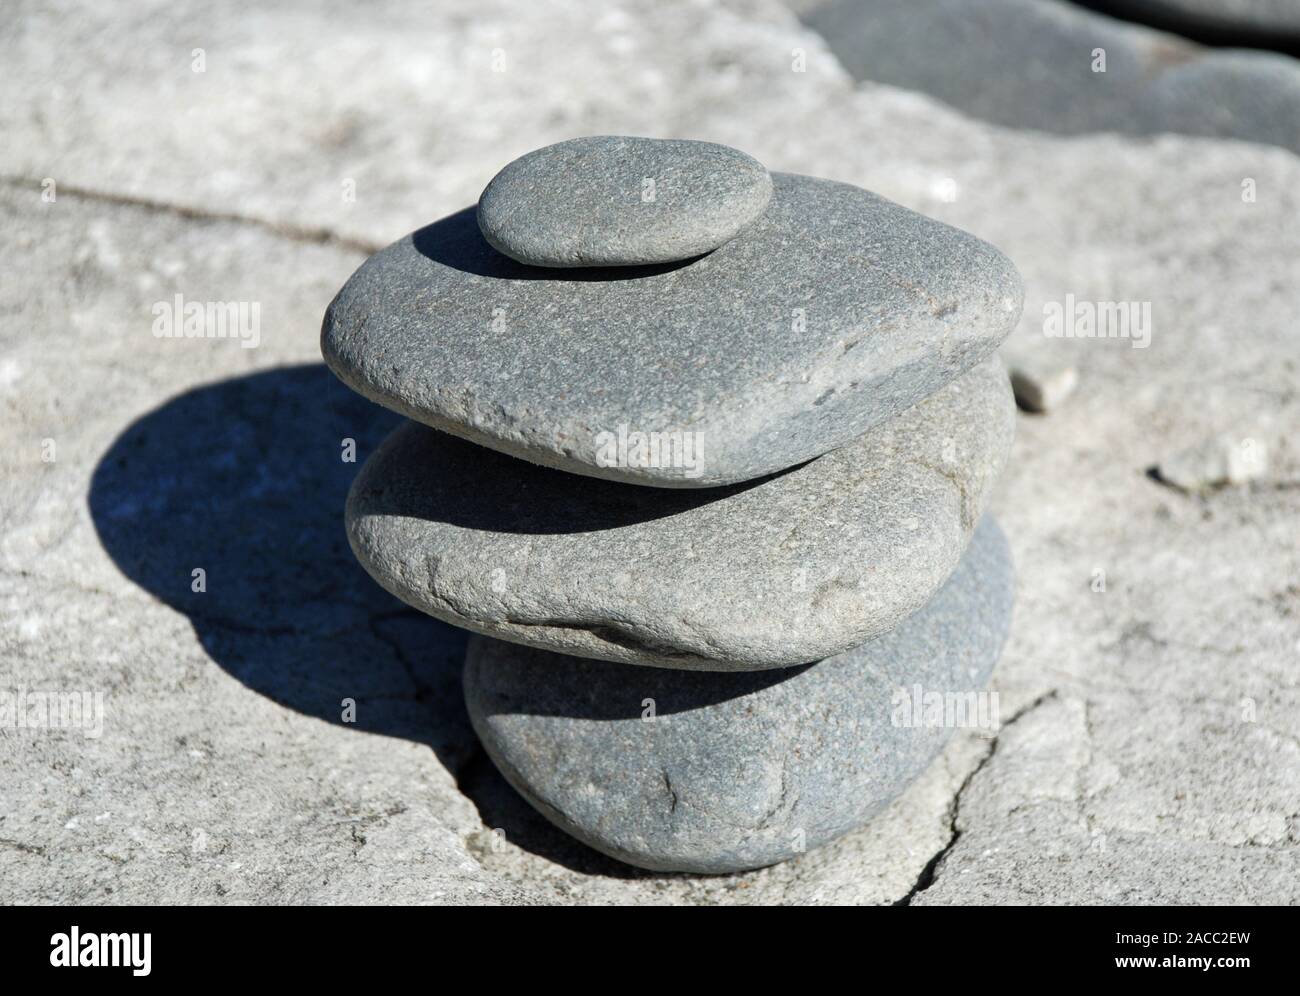 Stone stack for meditation and prayer Stock Photo